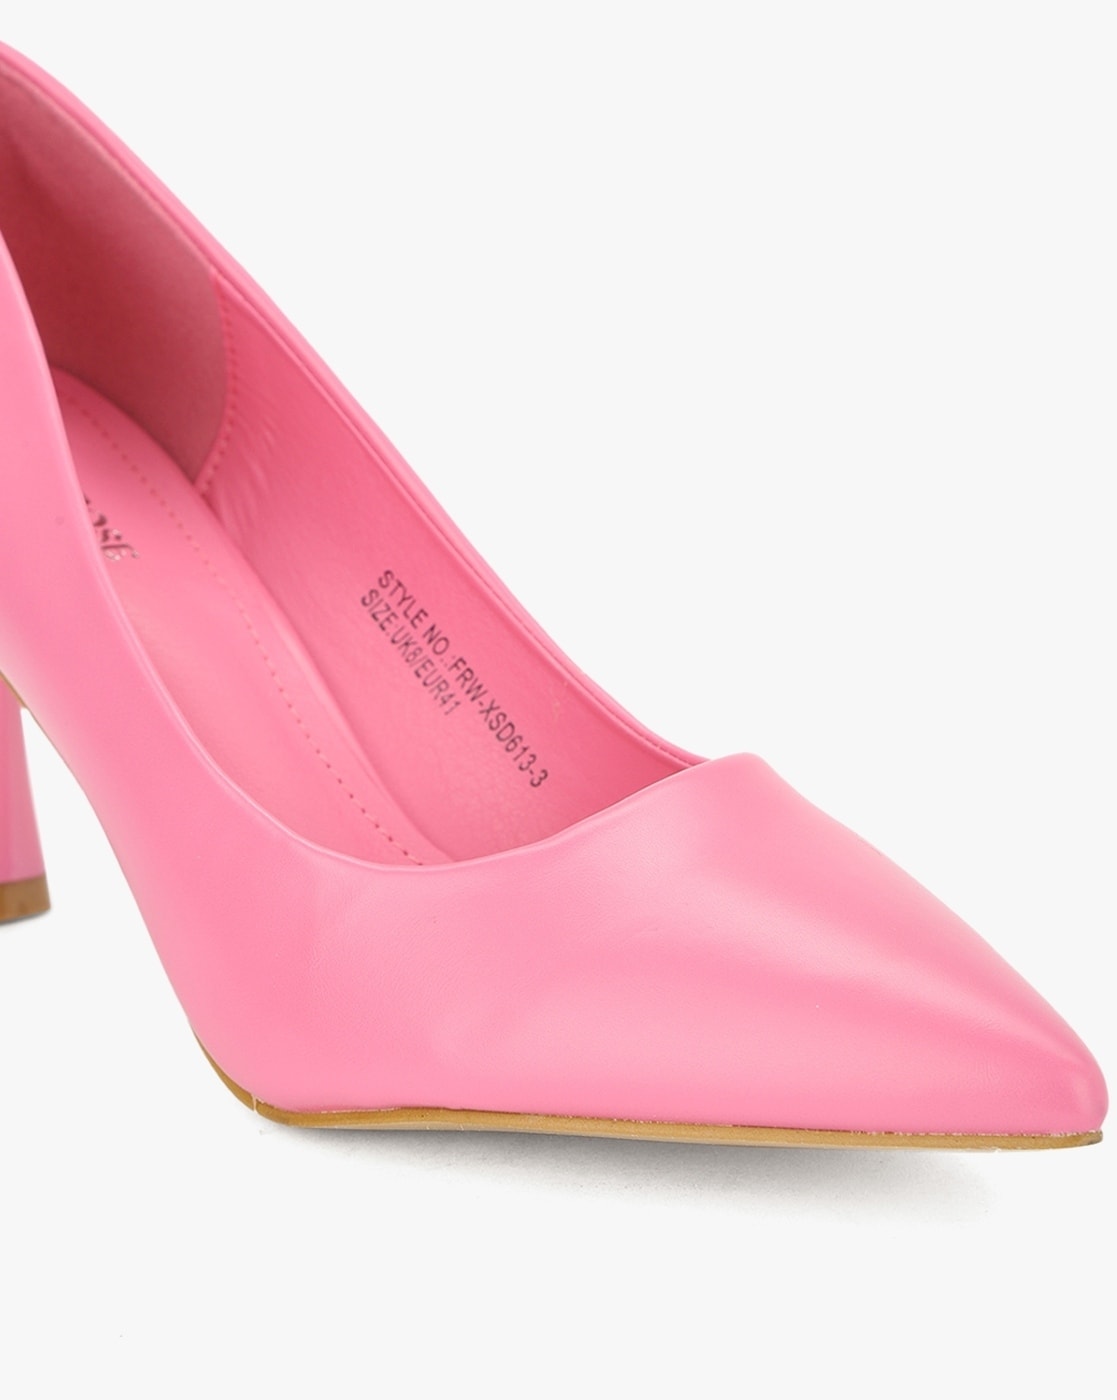 Classic Pointed Toe High Heels Fuchsia Delimena pink - KeeShoes